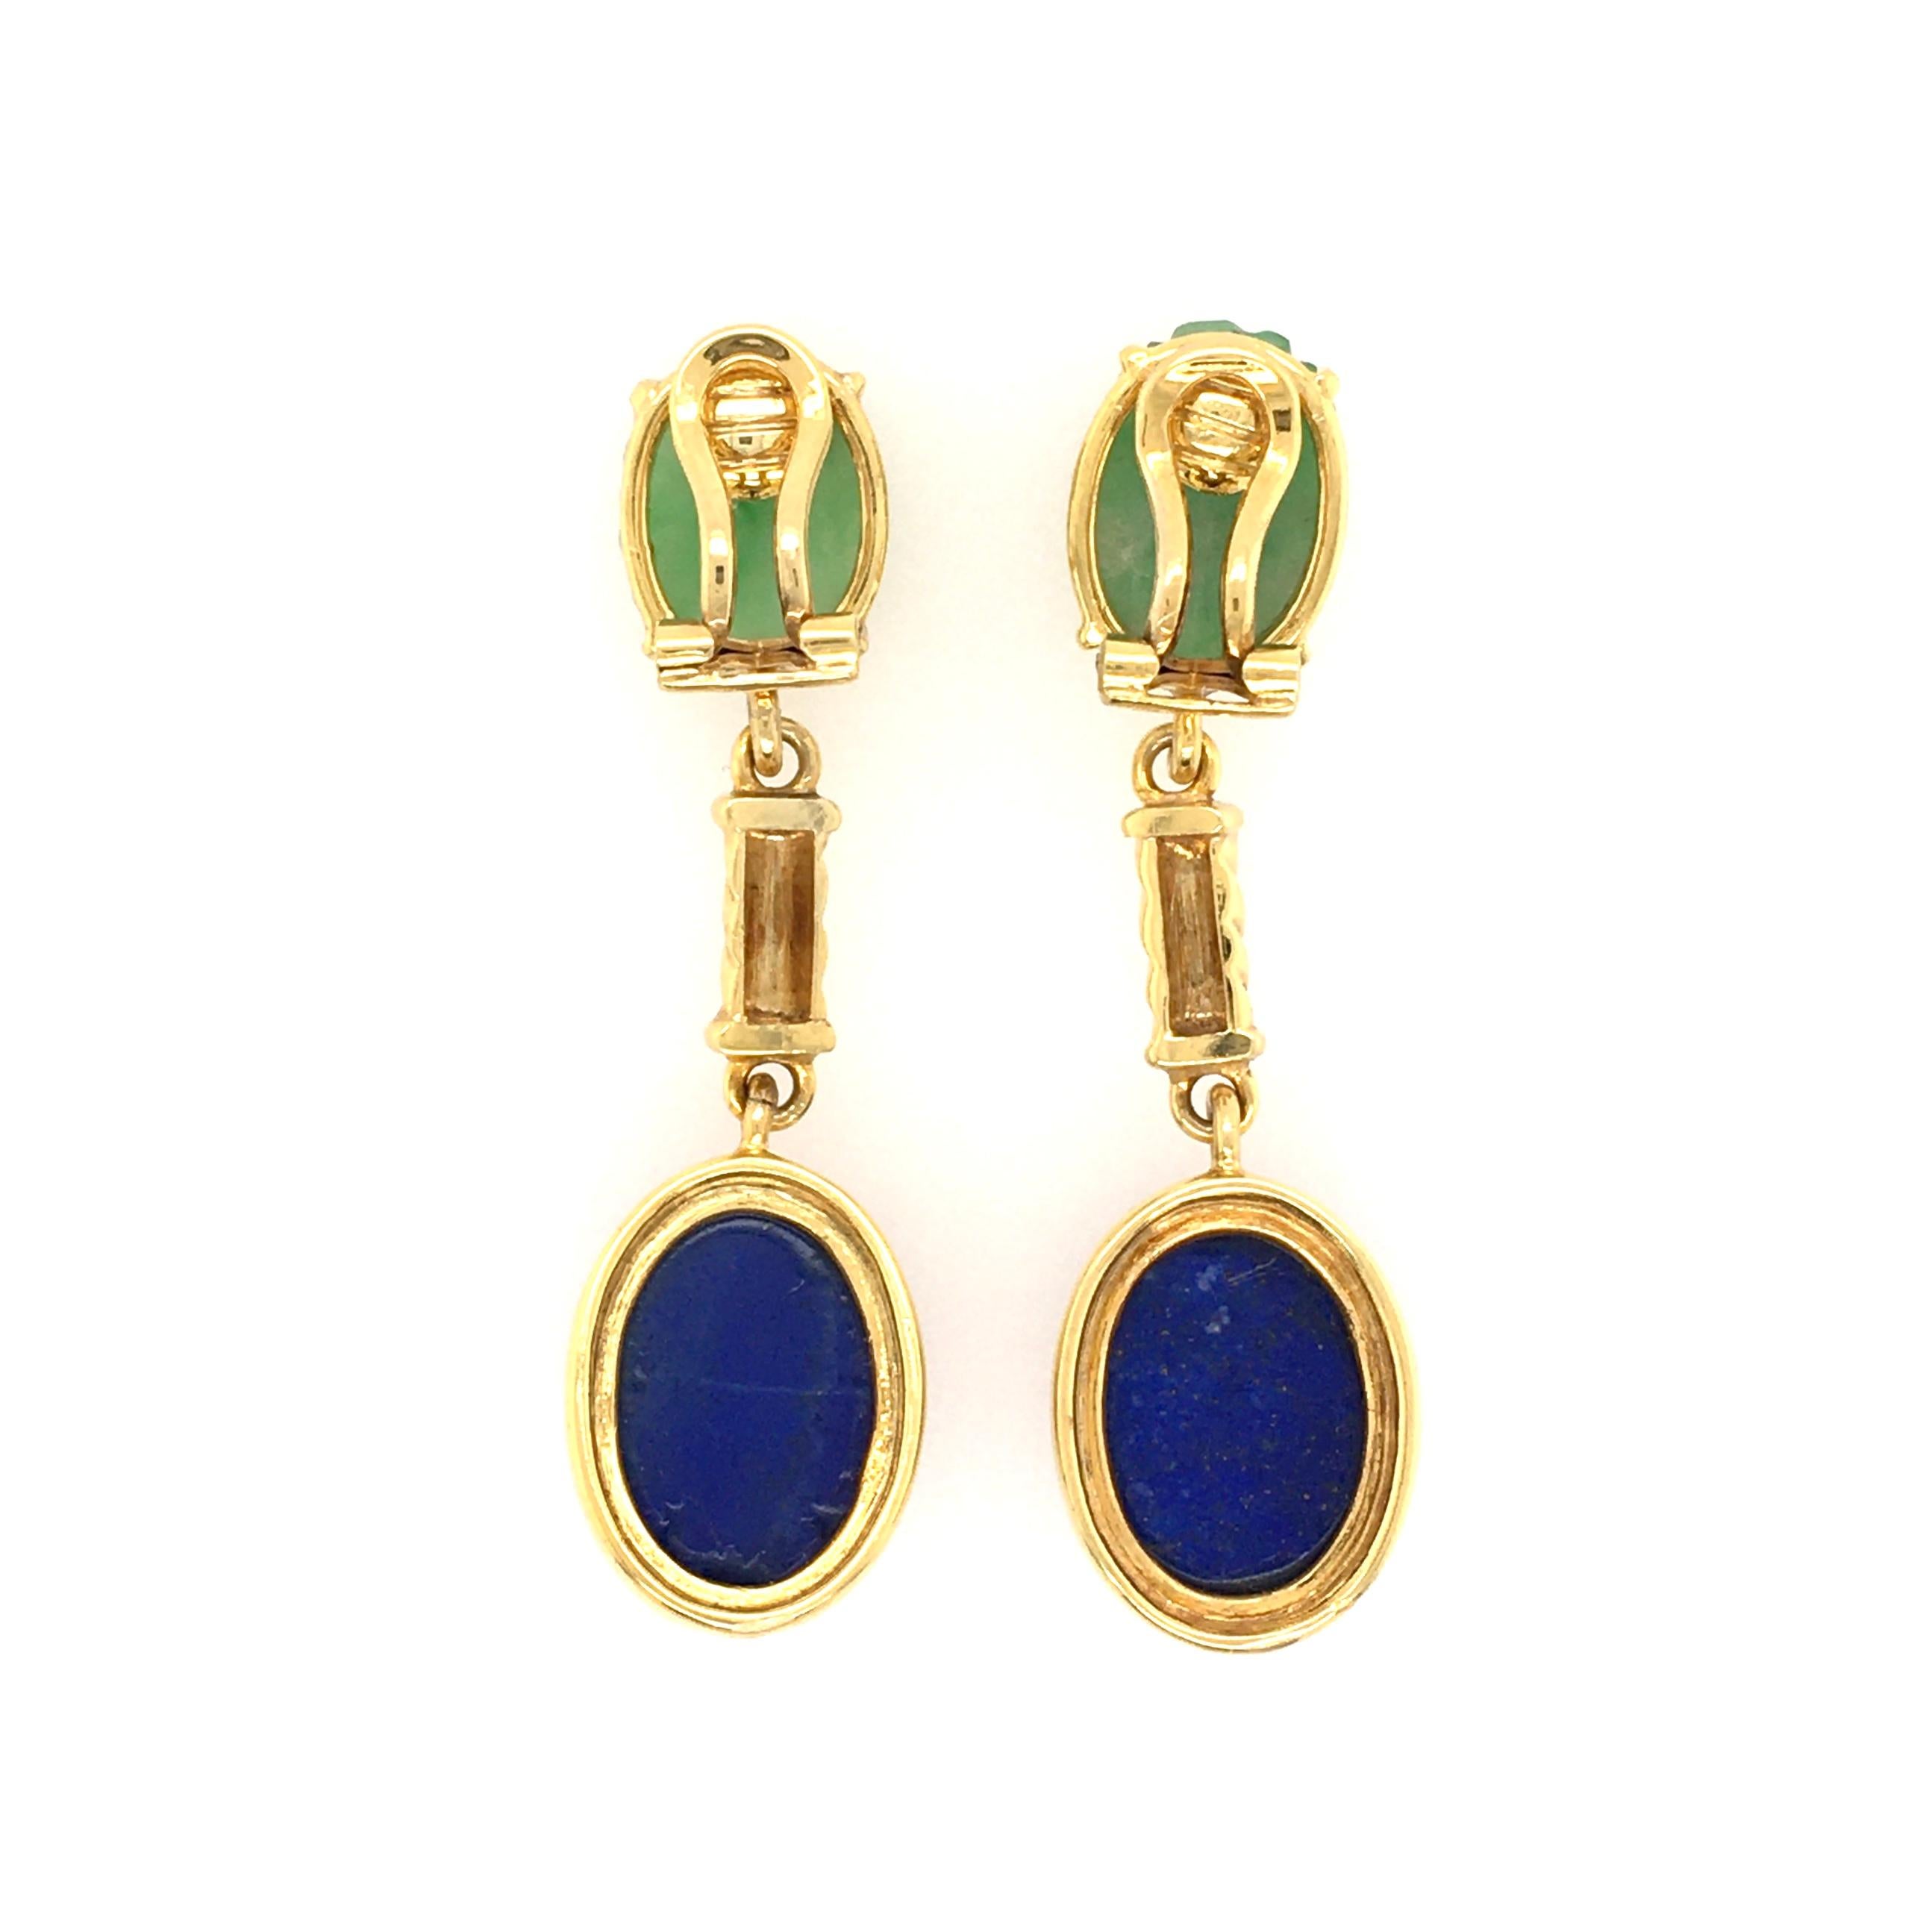 A pair of 14 karat yellow gold, jade and lapis lazuli earrings. Circa 1970. Each suspending an oval cabochon lapis lazuli, measuring approximately 16.0 x 13.0mm, from a ropework link and carved oval jade surmount, measuring approximately 13.5 x